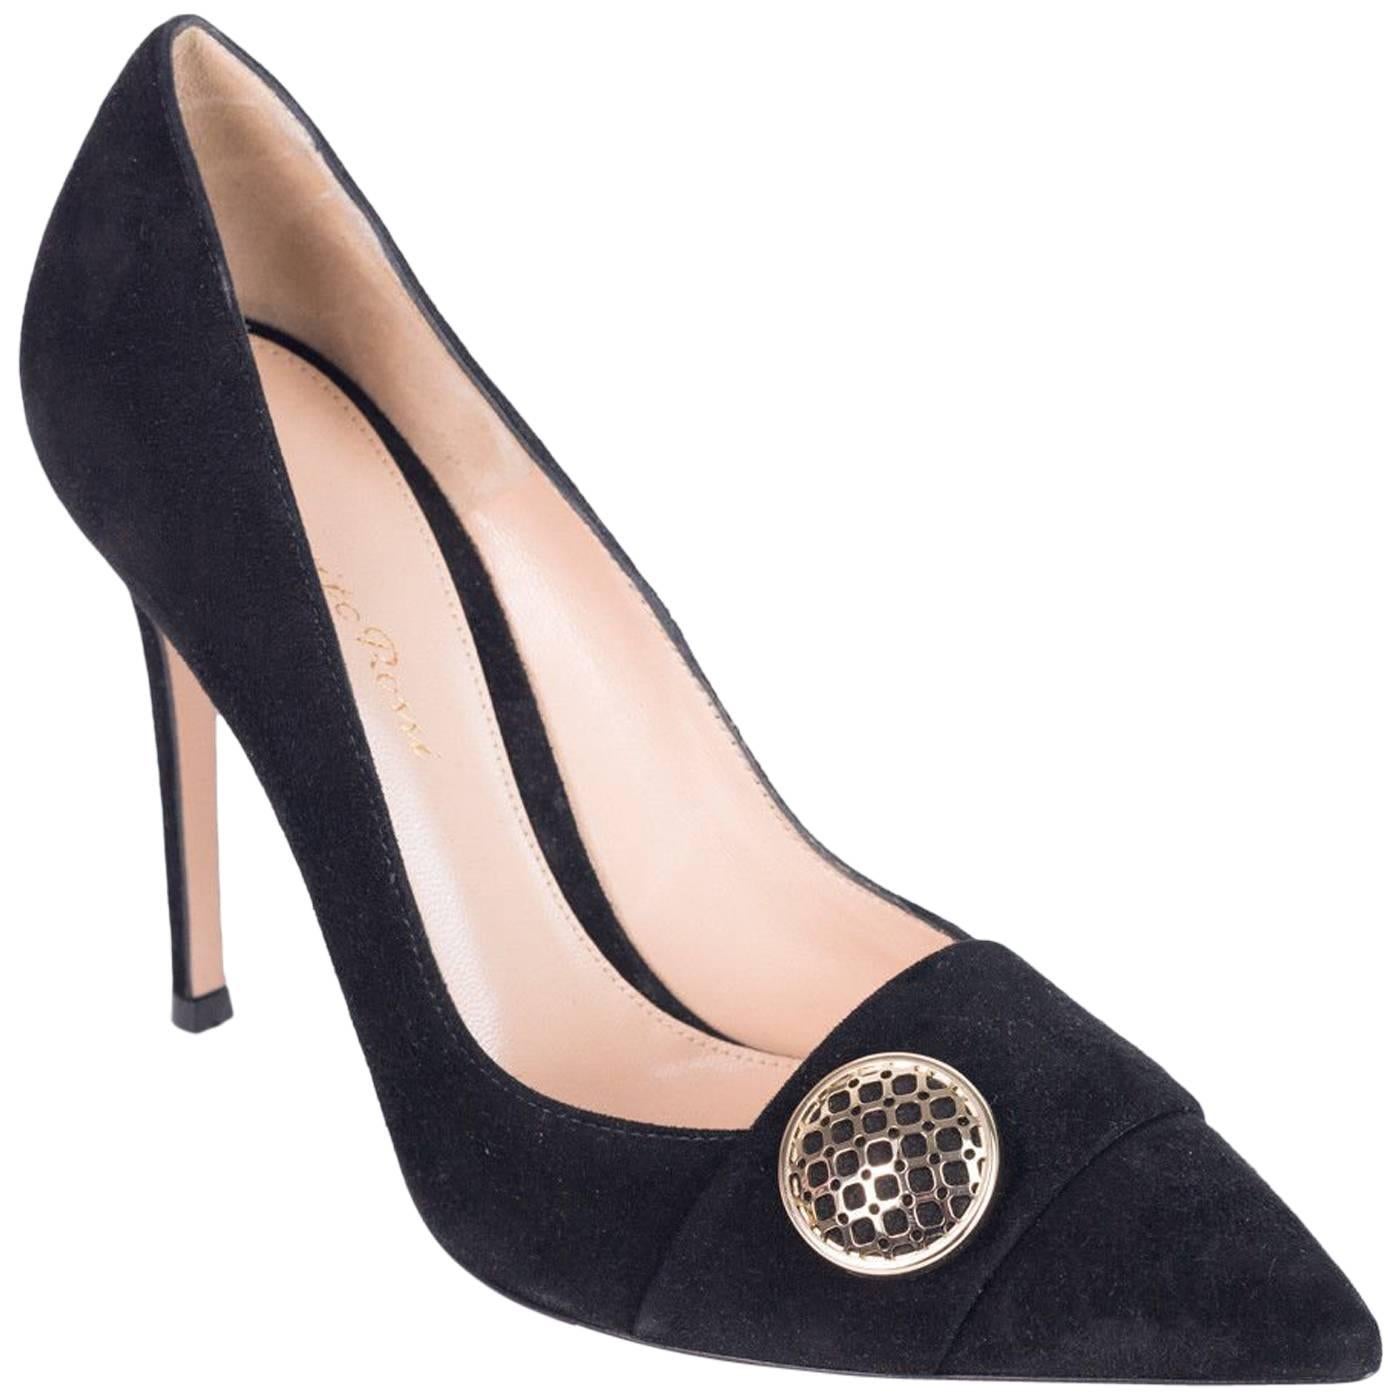 Gianvito Rossi Black Suede Embellished Button Pointed Toe Pumps For Sale